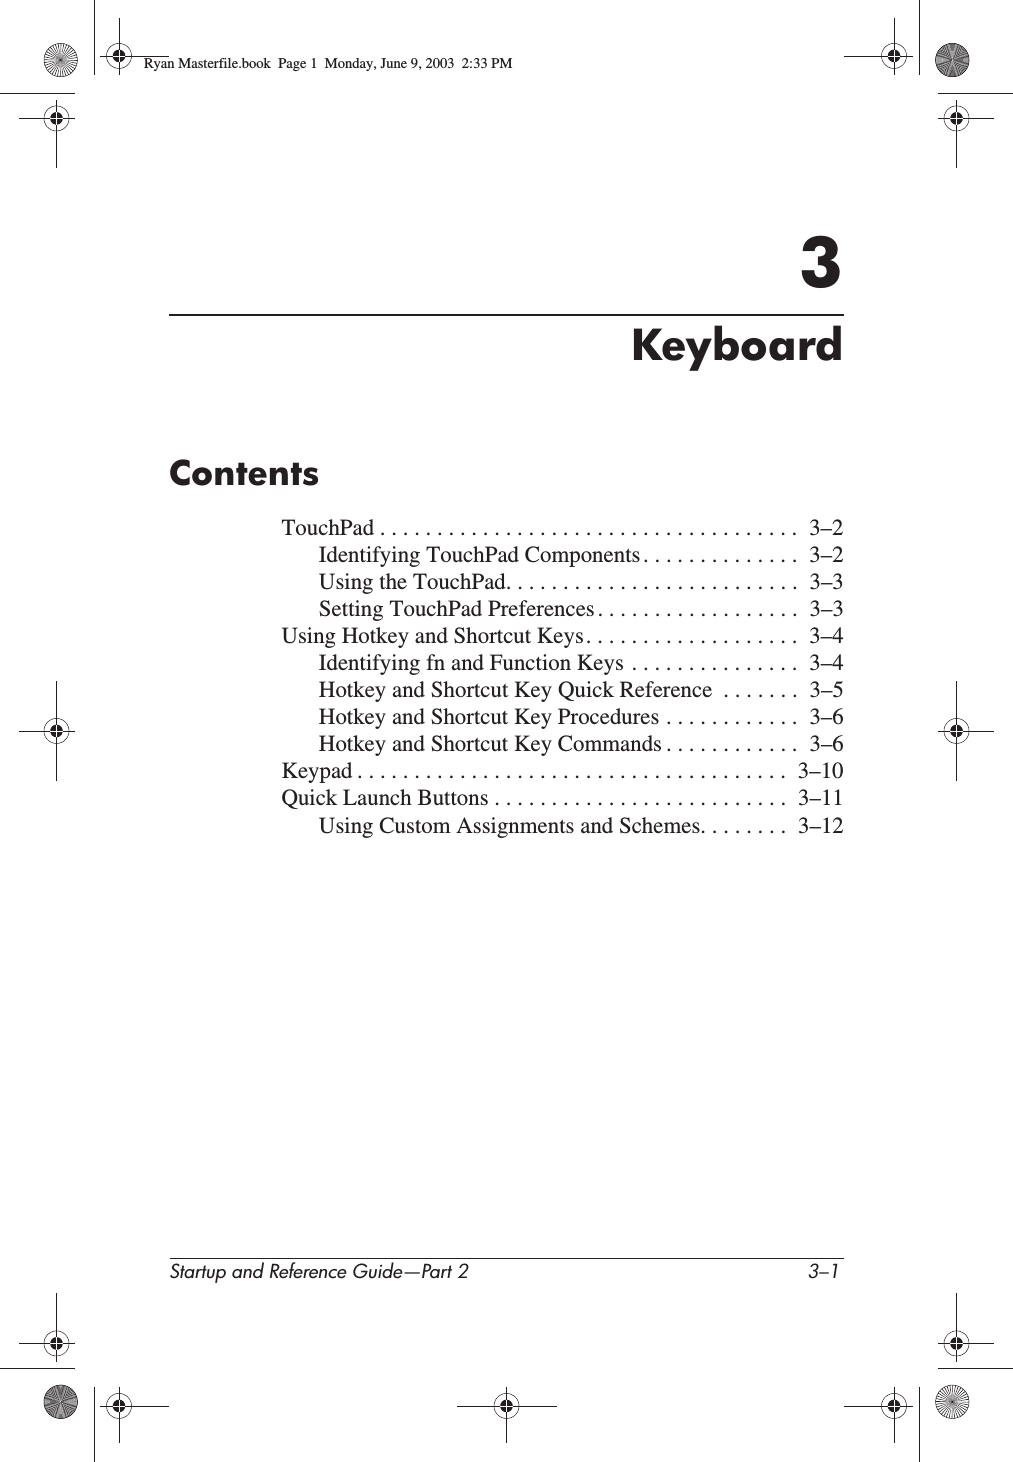 Startup and Reference Guide—Part 2 3–13KeyboardContentsTouchPad . . . . . . . . . . . . . . . . . . . . . . . . . . . . . . . . . . . . .  3–2Identifying TouchPad Components . . . . . . . . . . . . . .  3–2Using the TouchPad. . . . . . . . . . . . . . . . . . . . . . . . . .  3–3Setting TouchPad Preferences . . . . . . . . . . . . . . . . . .  3–3Using Hotkey and Shortcut Keys. . . . . . . . . . . . . . . . . . .  3–4Identifying fn and Function Keys . . . . . . . . . . . . . . .  3–4Hotkey and Shortcut Key Quick Reference  . . . . . . .  3–5Hotkey and Shortcut Key Procedures . . . . . . . . . . . .  3–6Hotkey and Shortcut Key Commands . . . . . . . . . . . .  3–6Keypad . . . . . . . . . . . . . . . . . . . . . . . . . . . . . . . . . . . . . .  3–10Quick Launch Buttons . . . . . . . . . . . . . . . . . . . . . . . . . .  3–11Using Custom Assignments and Schemes. . . . . . . .  3–12Ryan Masterfile.book  Page 1  Monday, June 9, 2003  2:33 PM